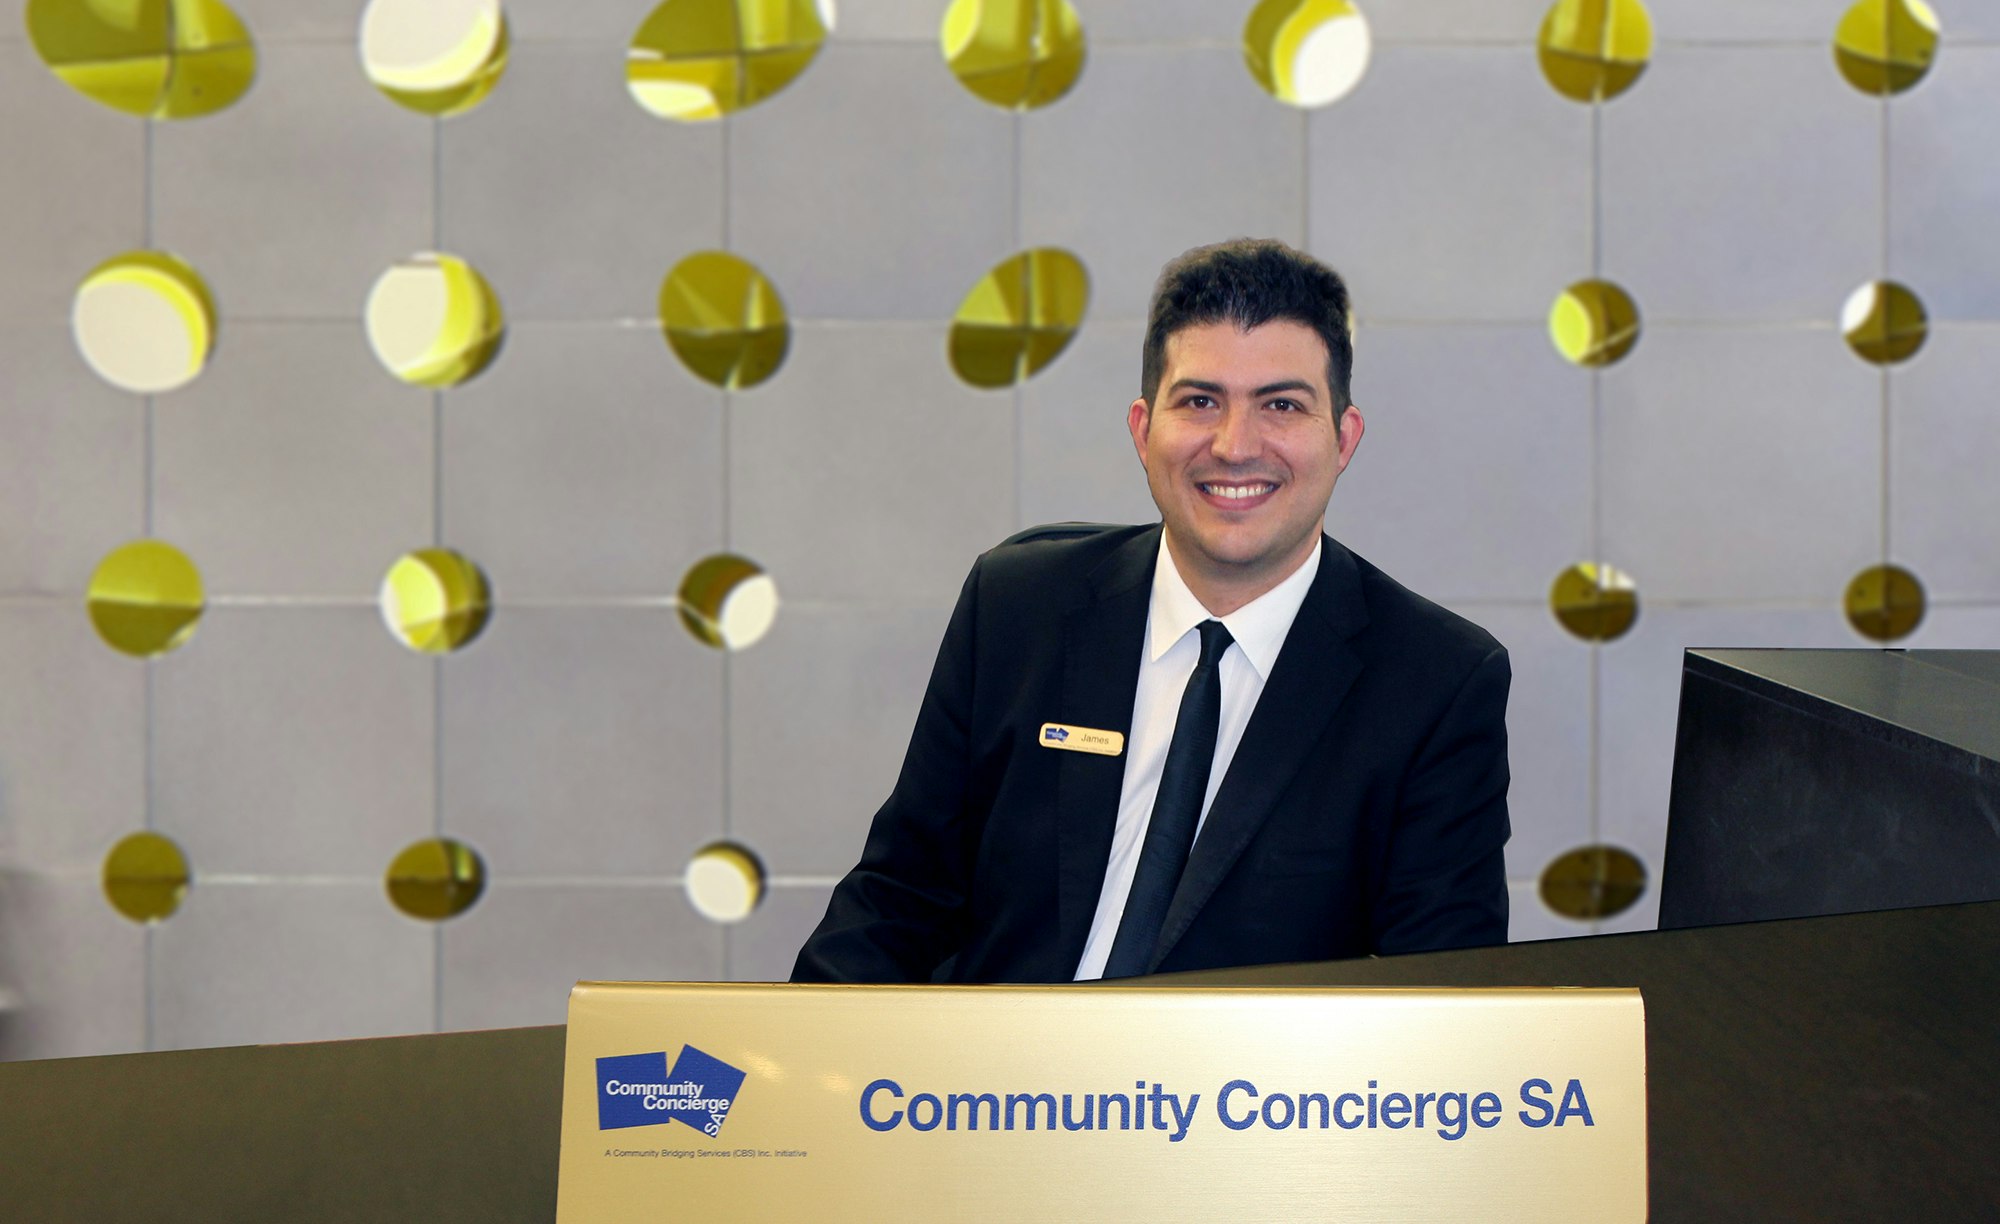 <p>The friendly CCSA team have been offering their valued concierge services since 2011 [Source: CBS]</p>
